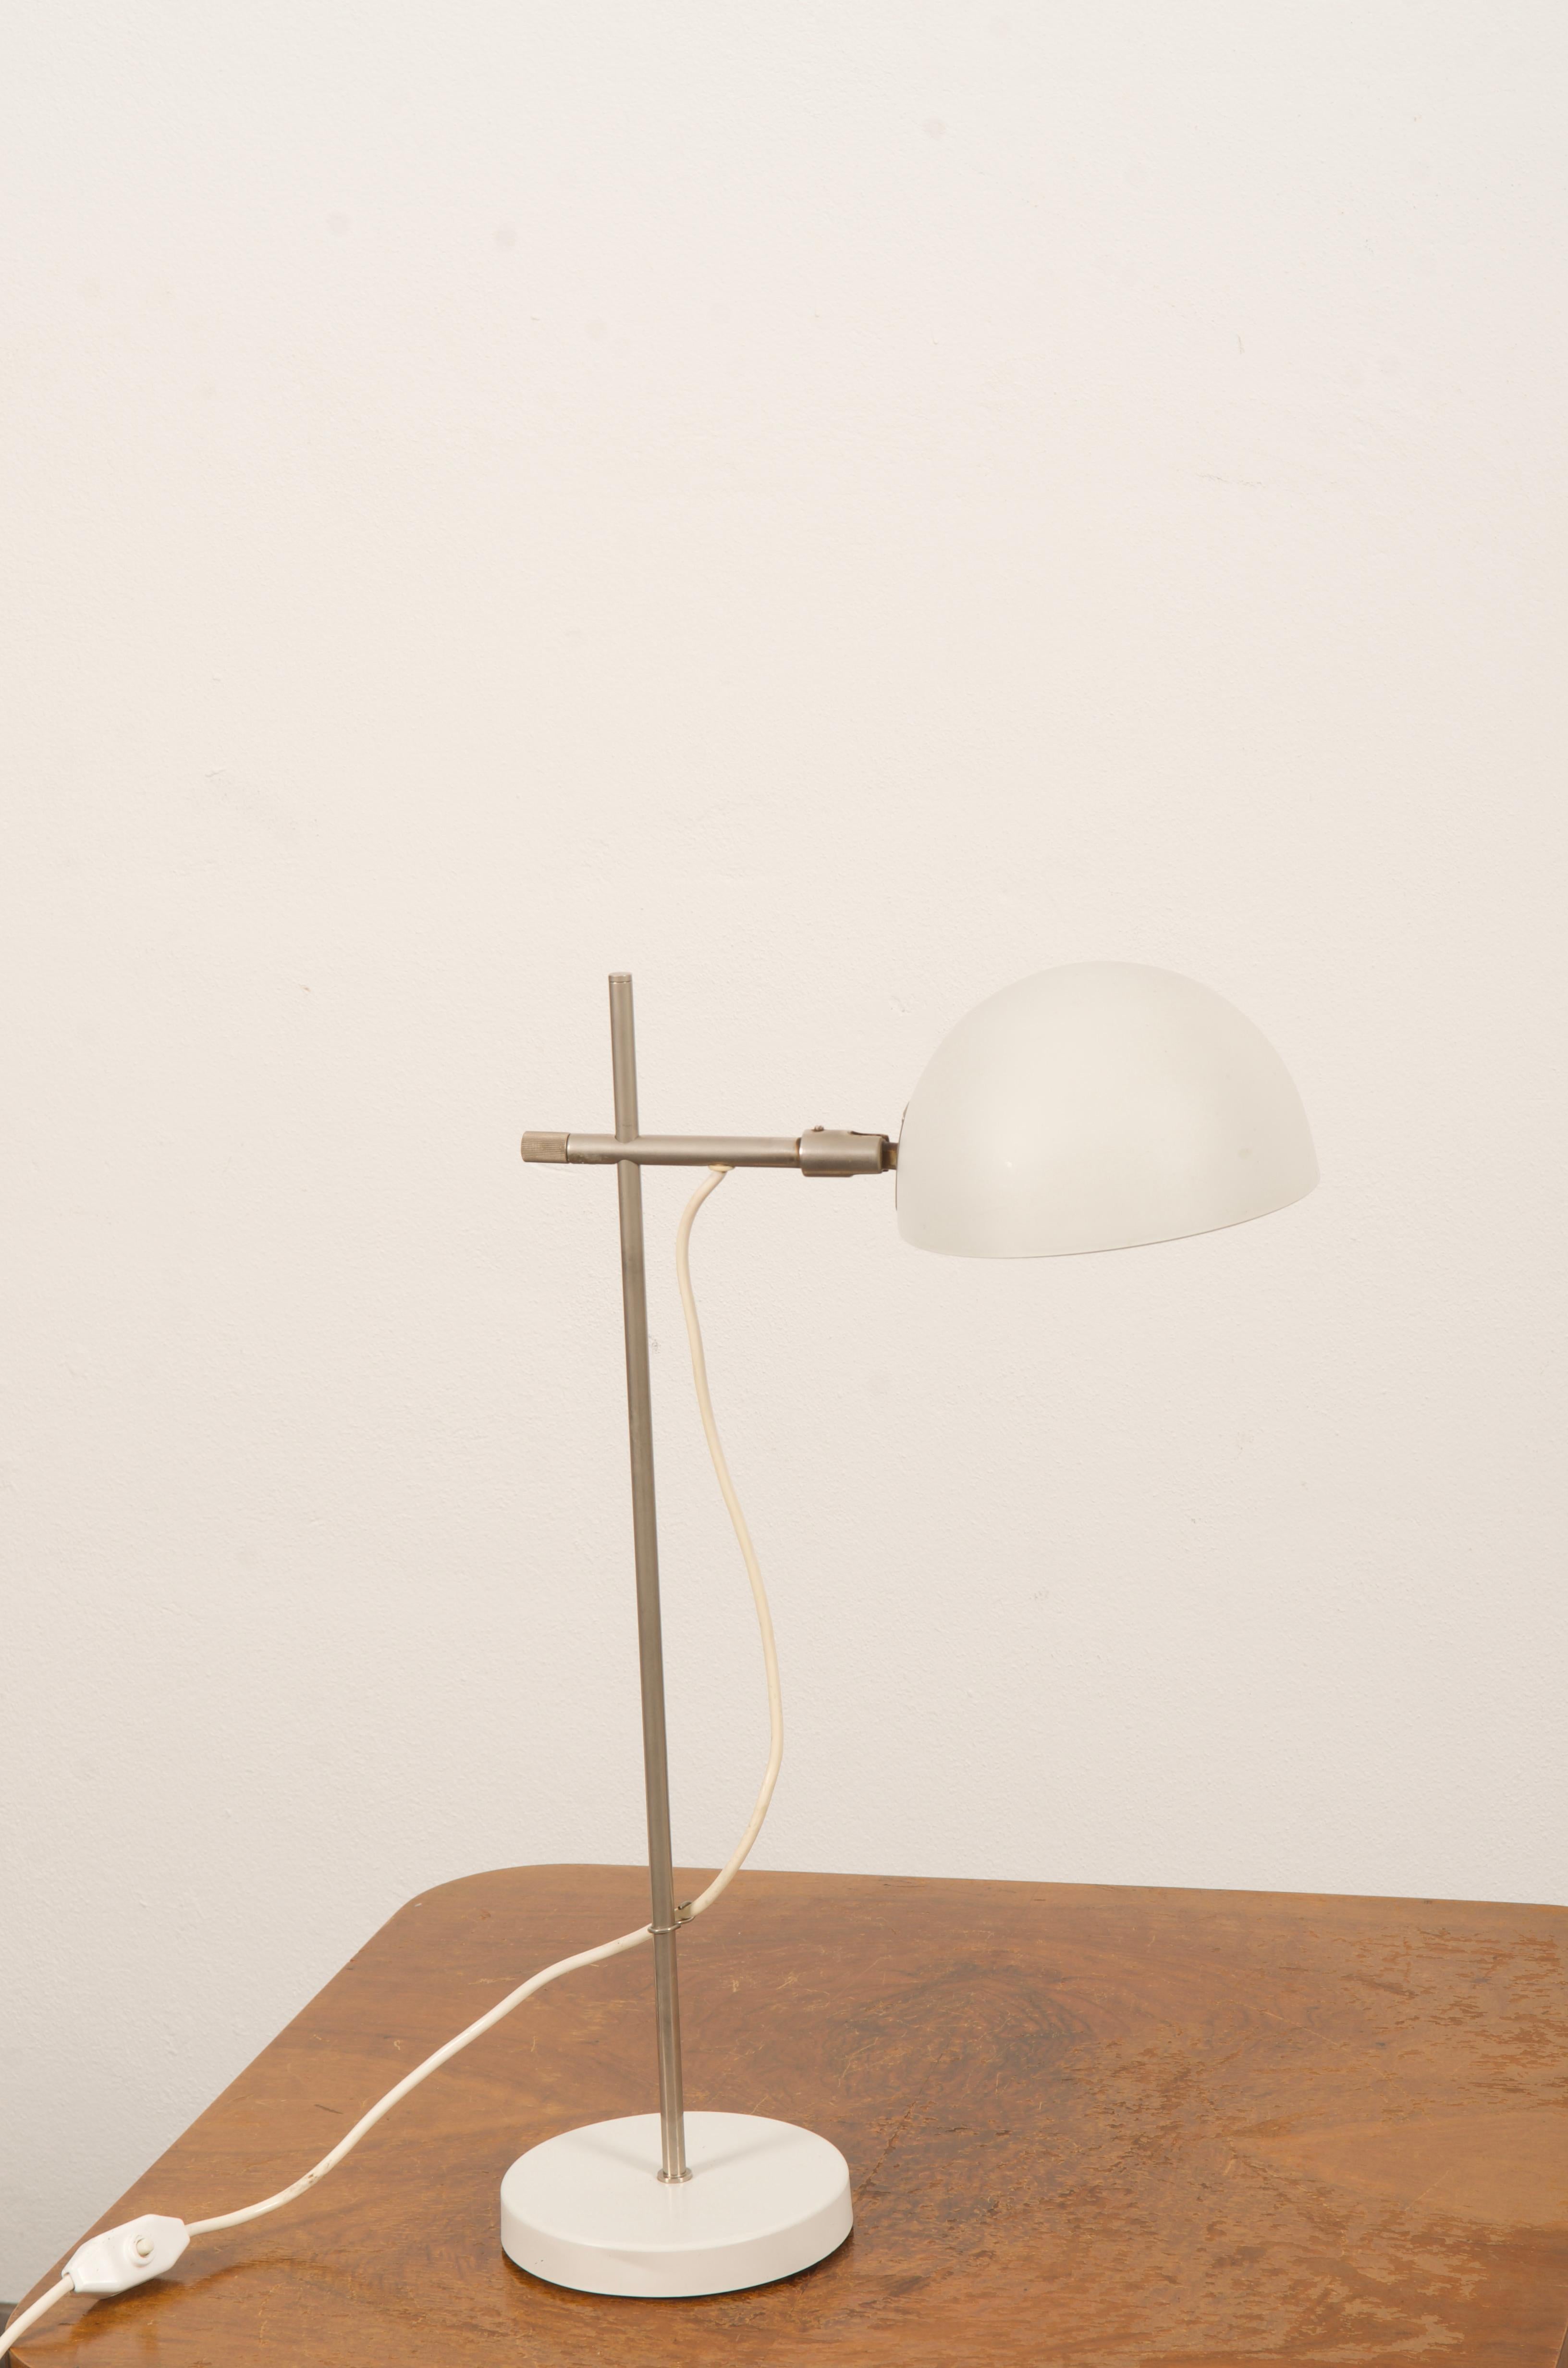 Brass construction chromed surface laquered shade and base, fitted with one E27 sockets. 
Made in Denmark n the 1970s.